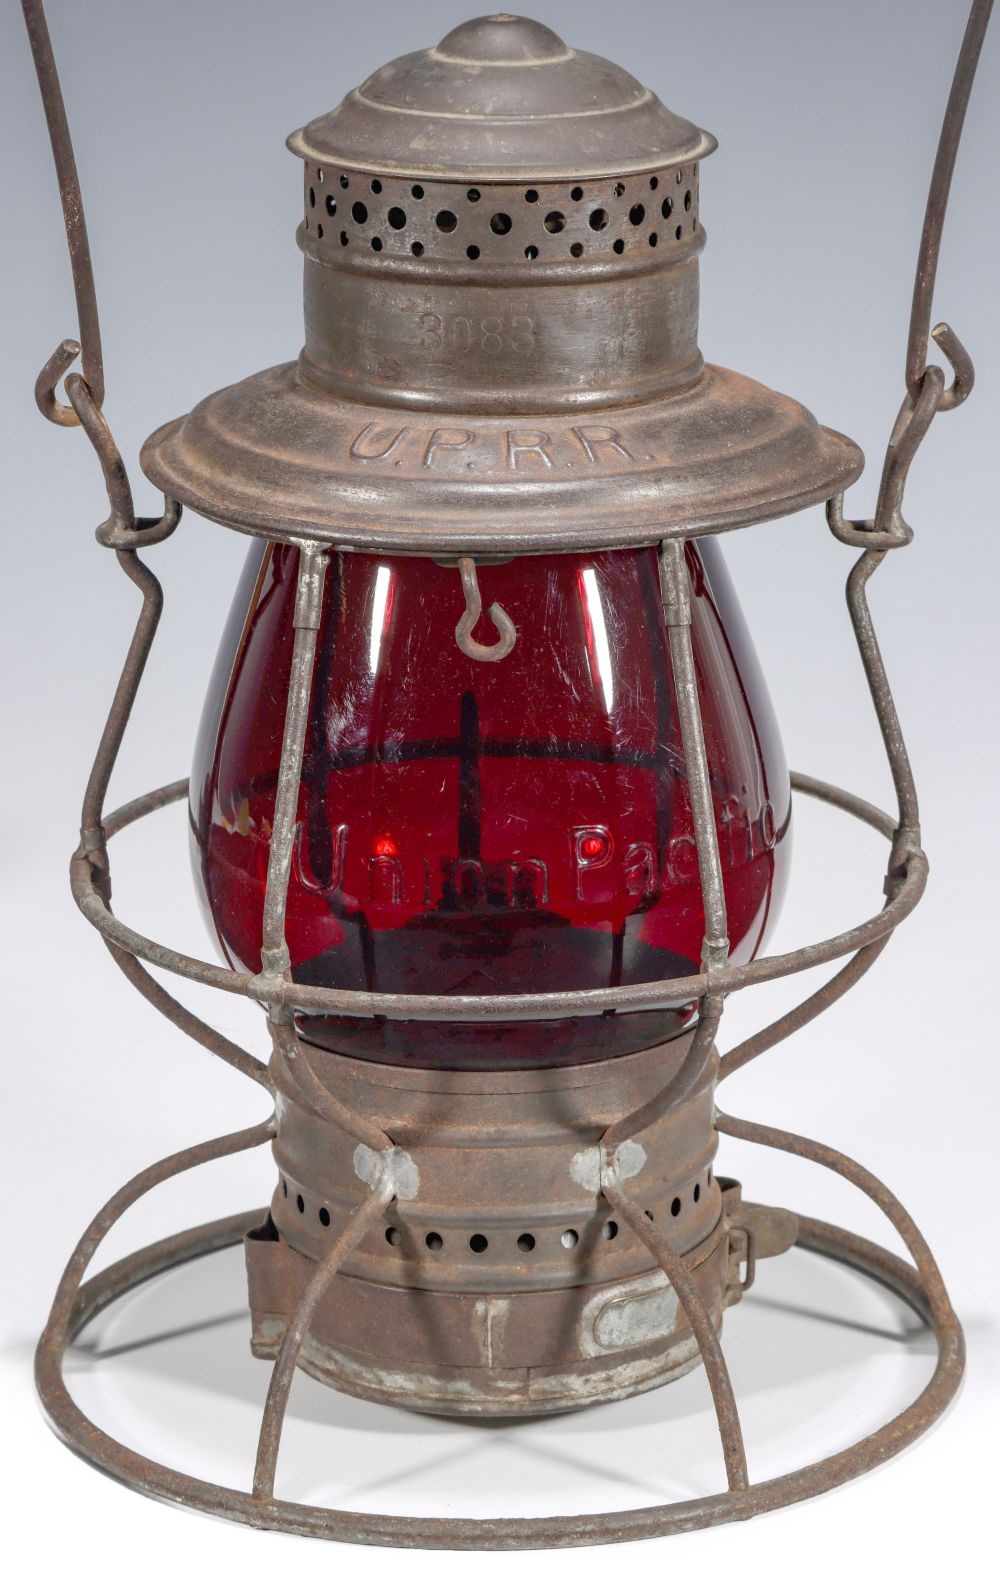 A RARE LANTERN WITH TALL RED GLOBE CAST Union Pacific